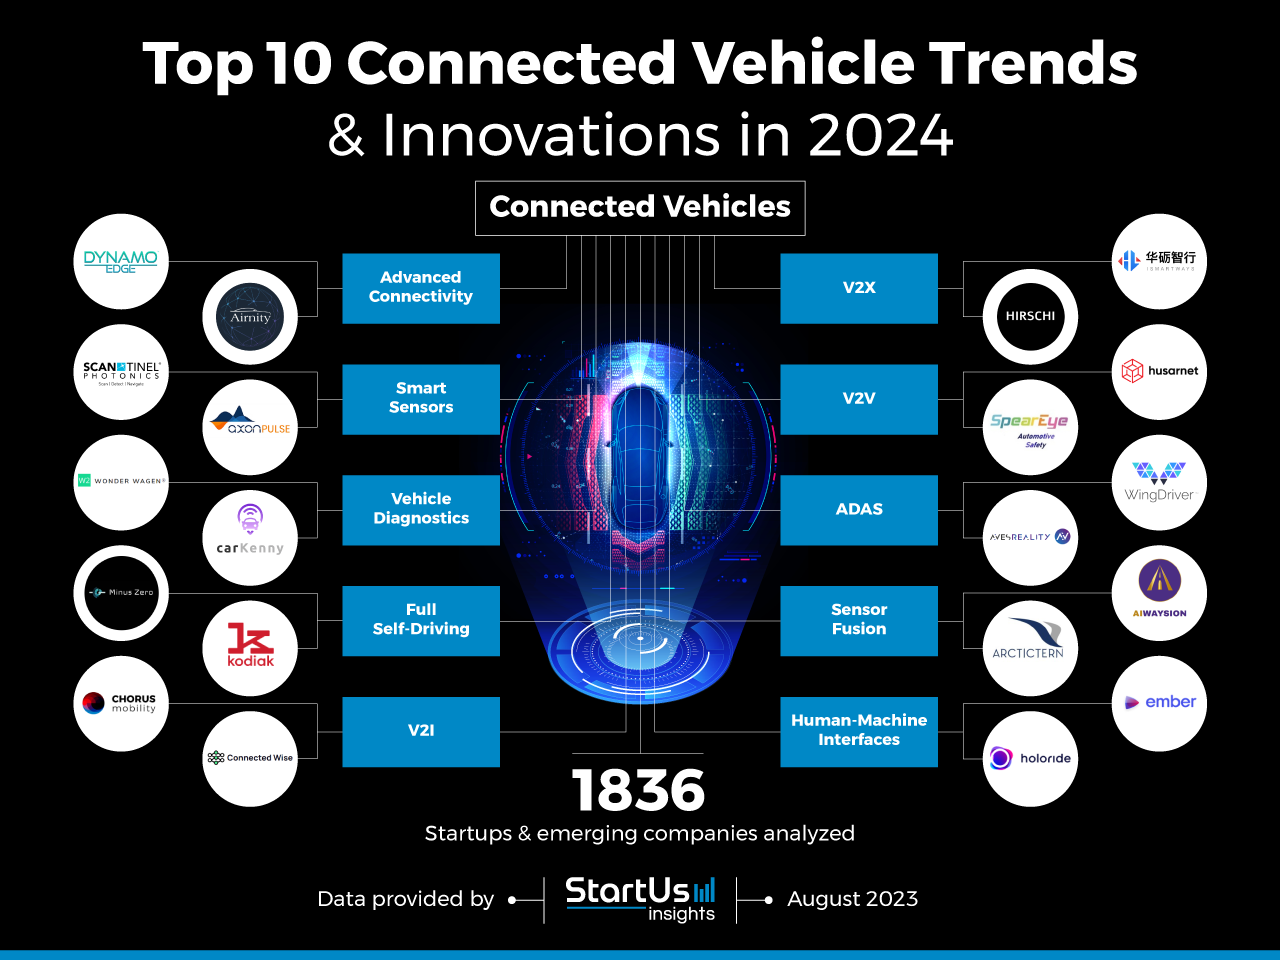 Top 10 Connected Vehicle Trends in 2024 | StartUs Insights